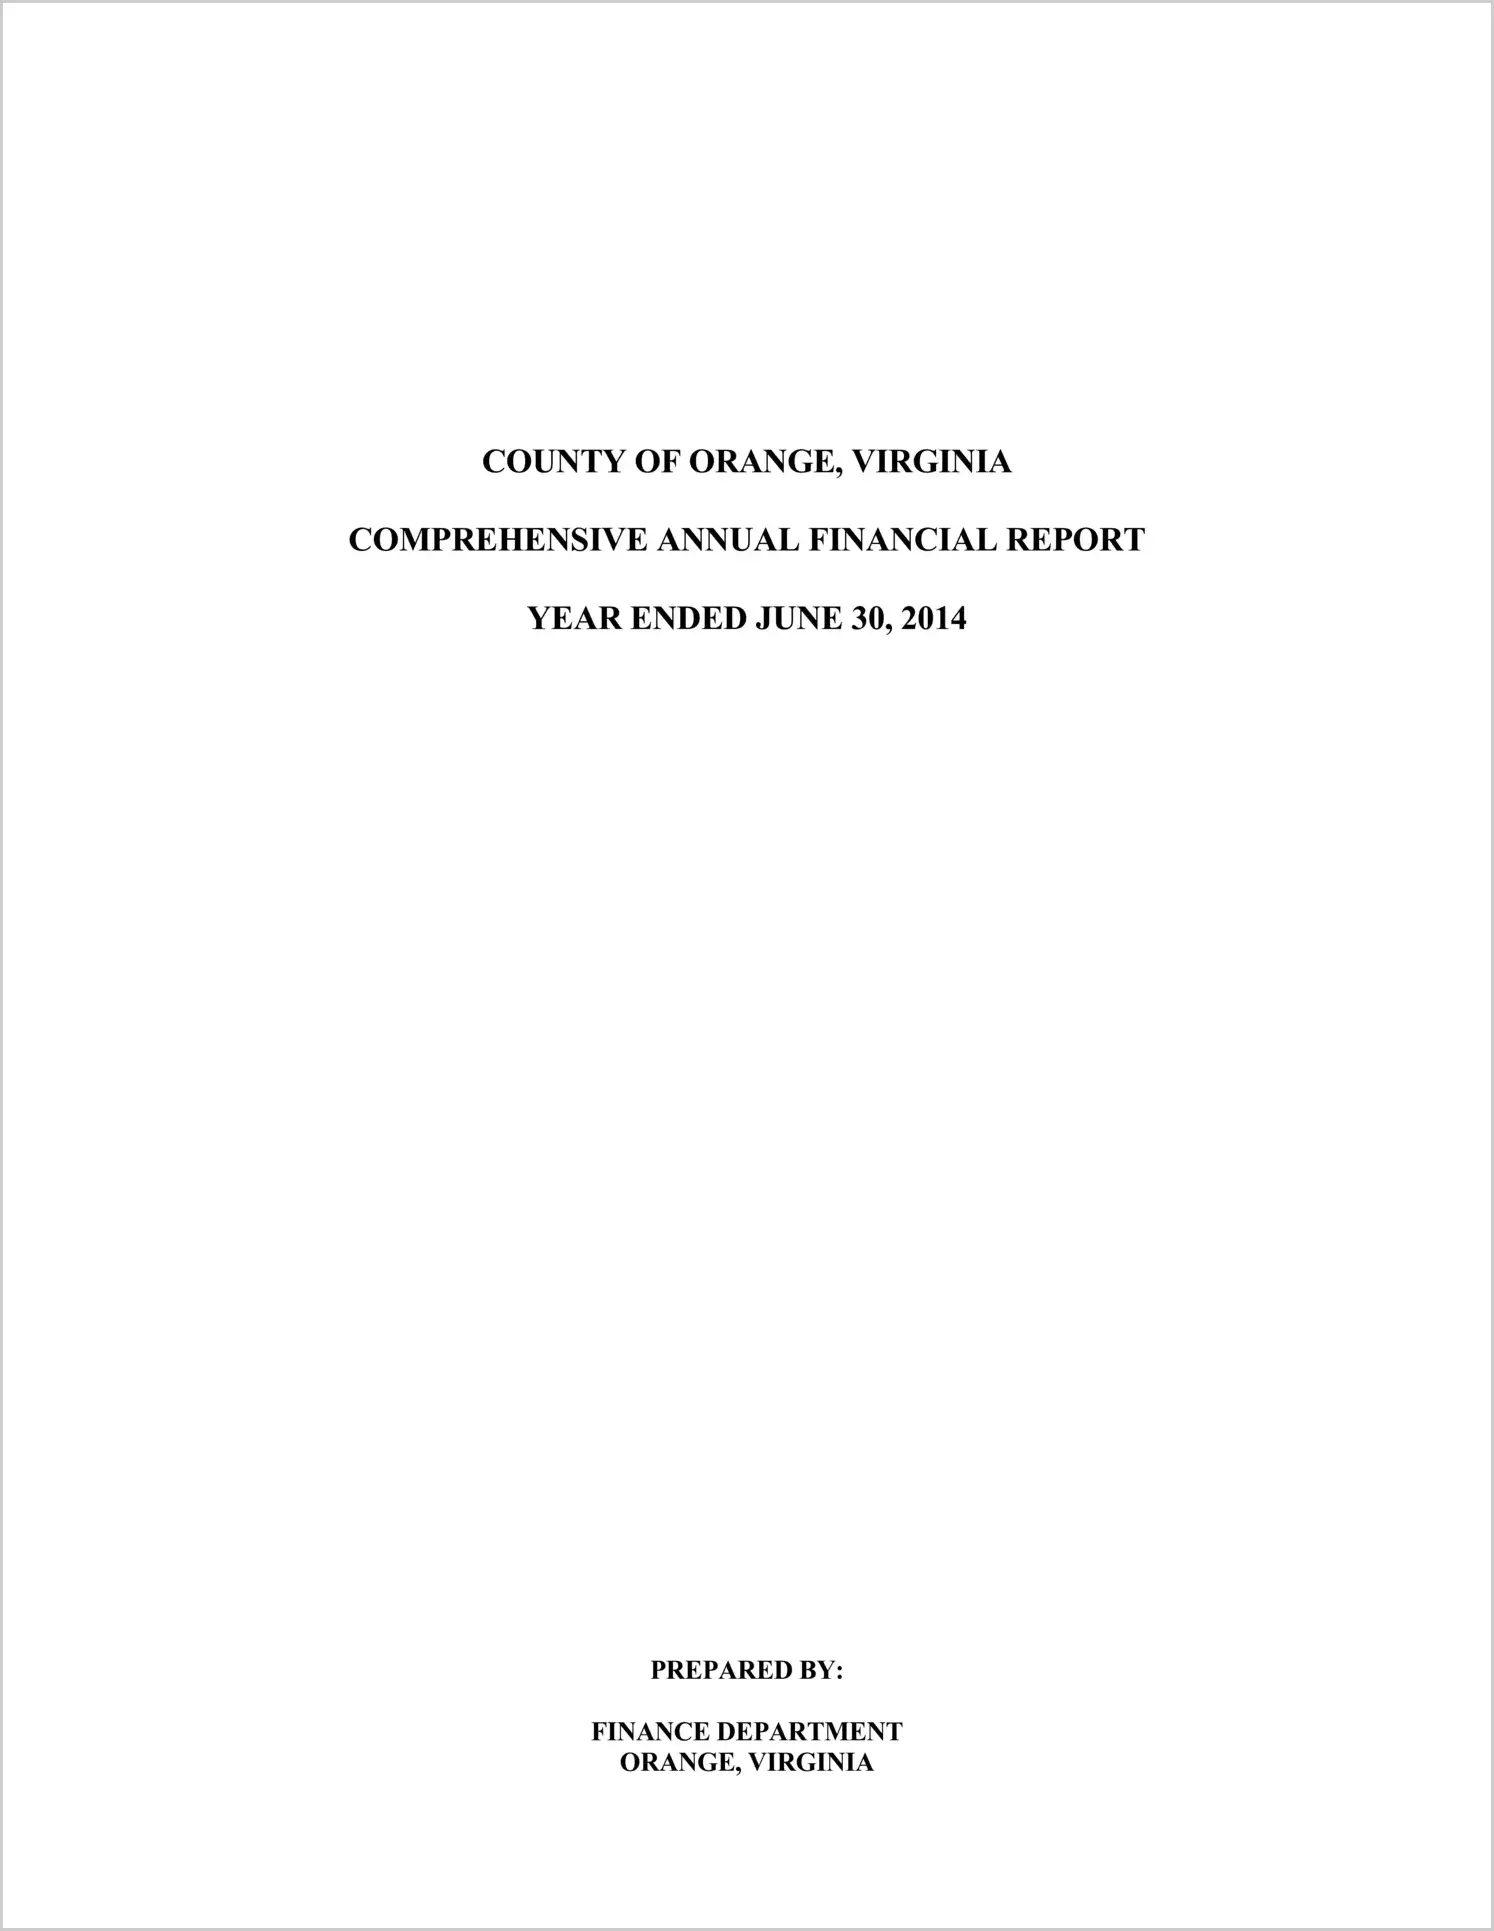 2014 Annual Financial Report for County of Orange